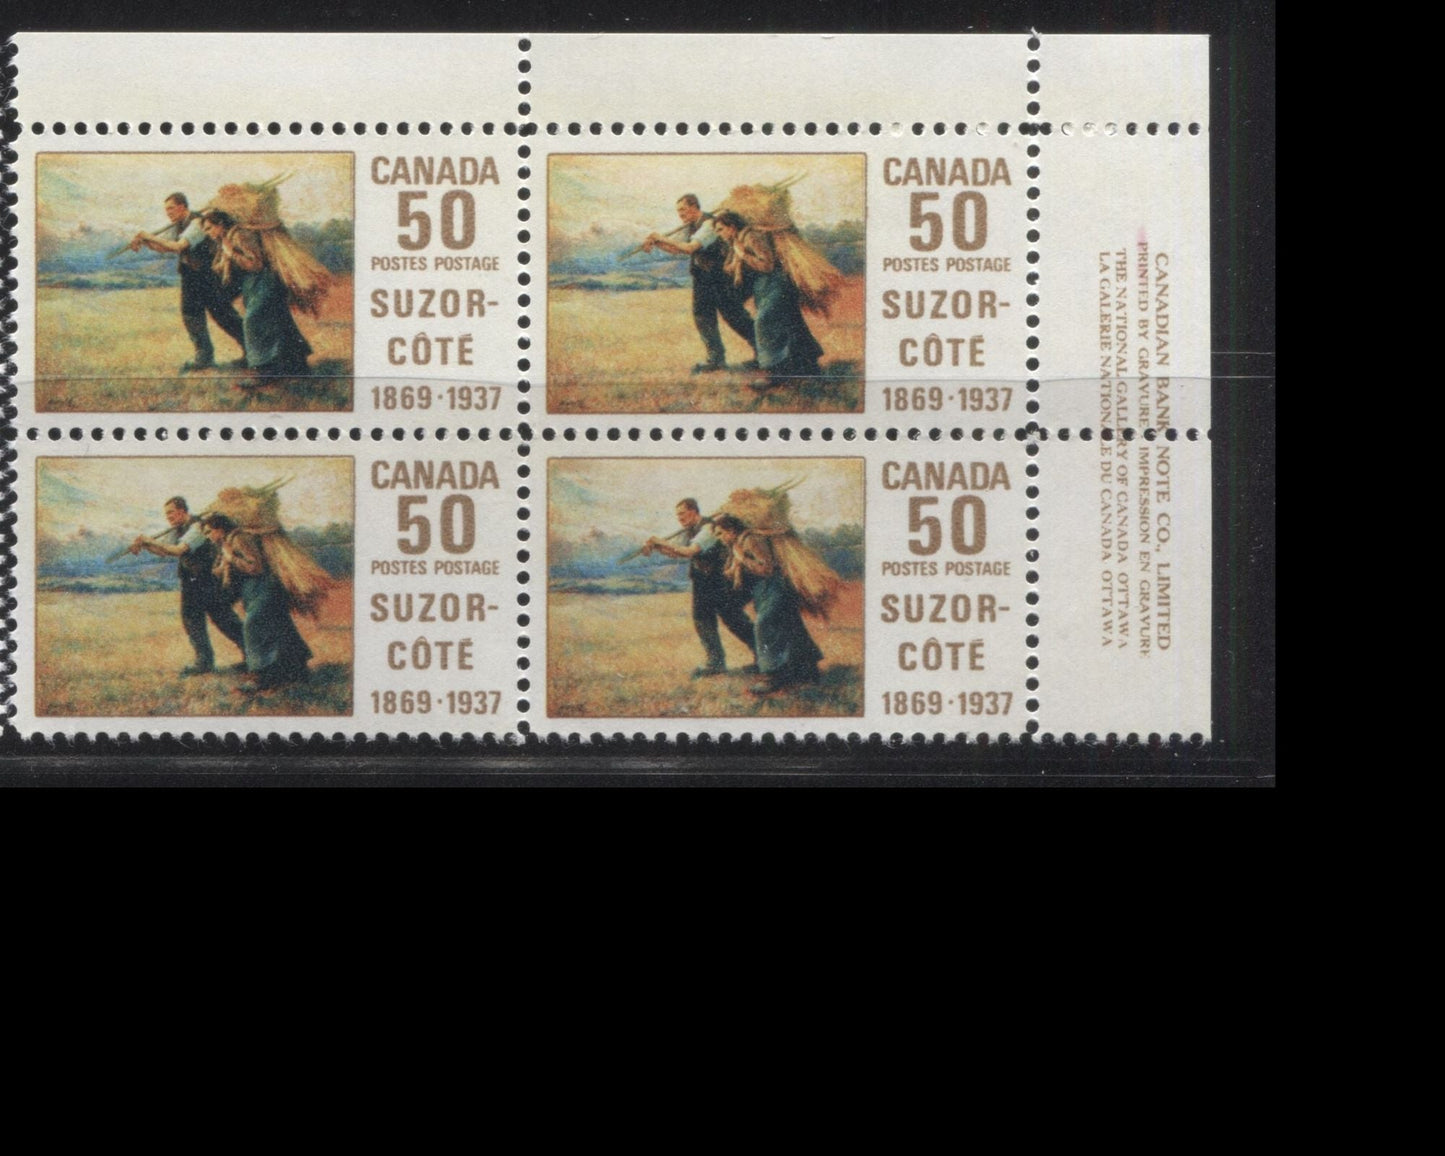 Lot 87A Canada #492 50c Multicolored Return From The Harvest Field, 1969 Suzor-Cote Issue, A VFNH UR Plate Block Of 4